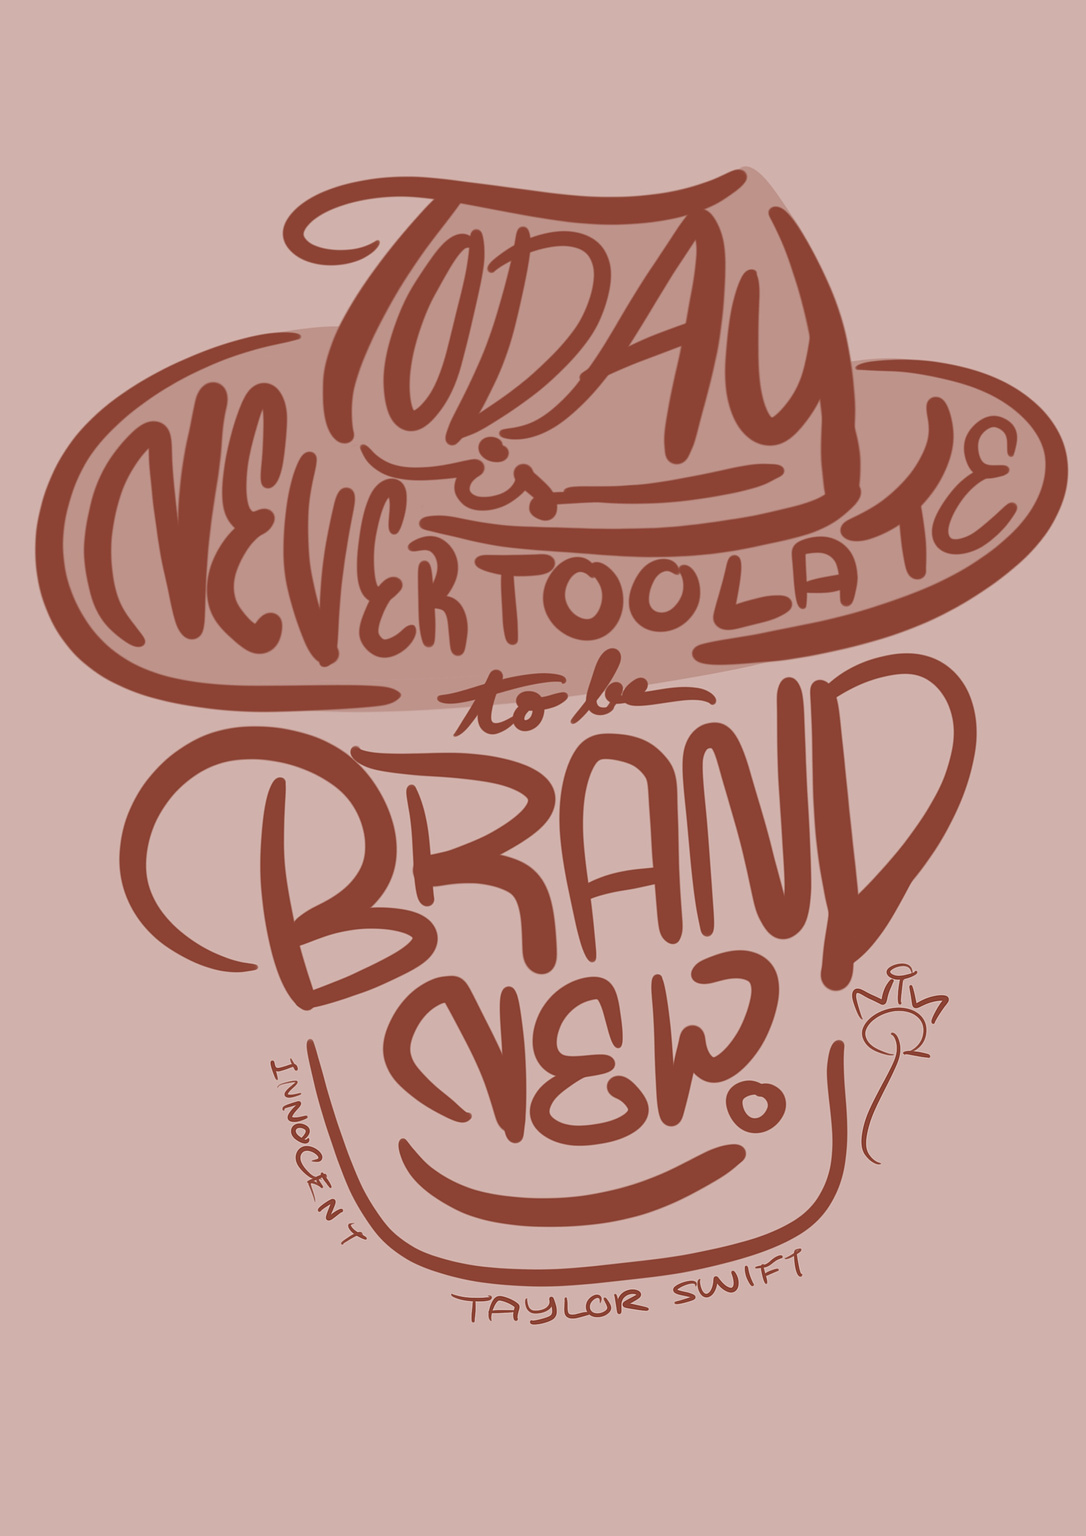 The lettering art with the lyrics "Today is never too late
to be brand new." from Taylor Swift